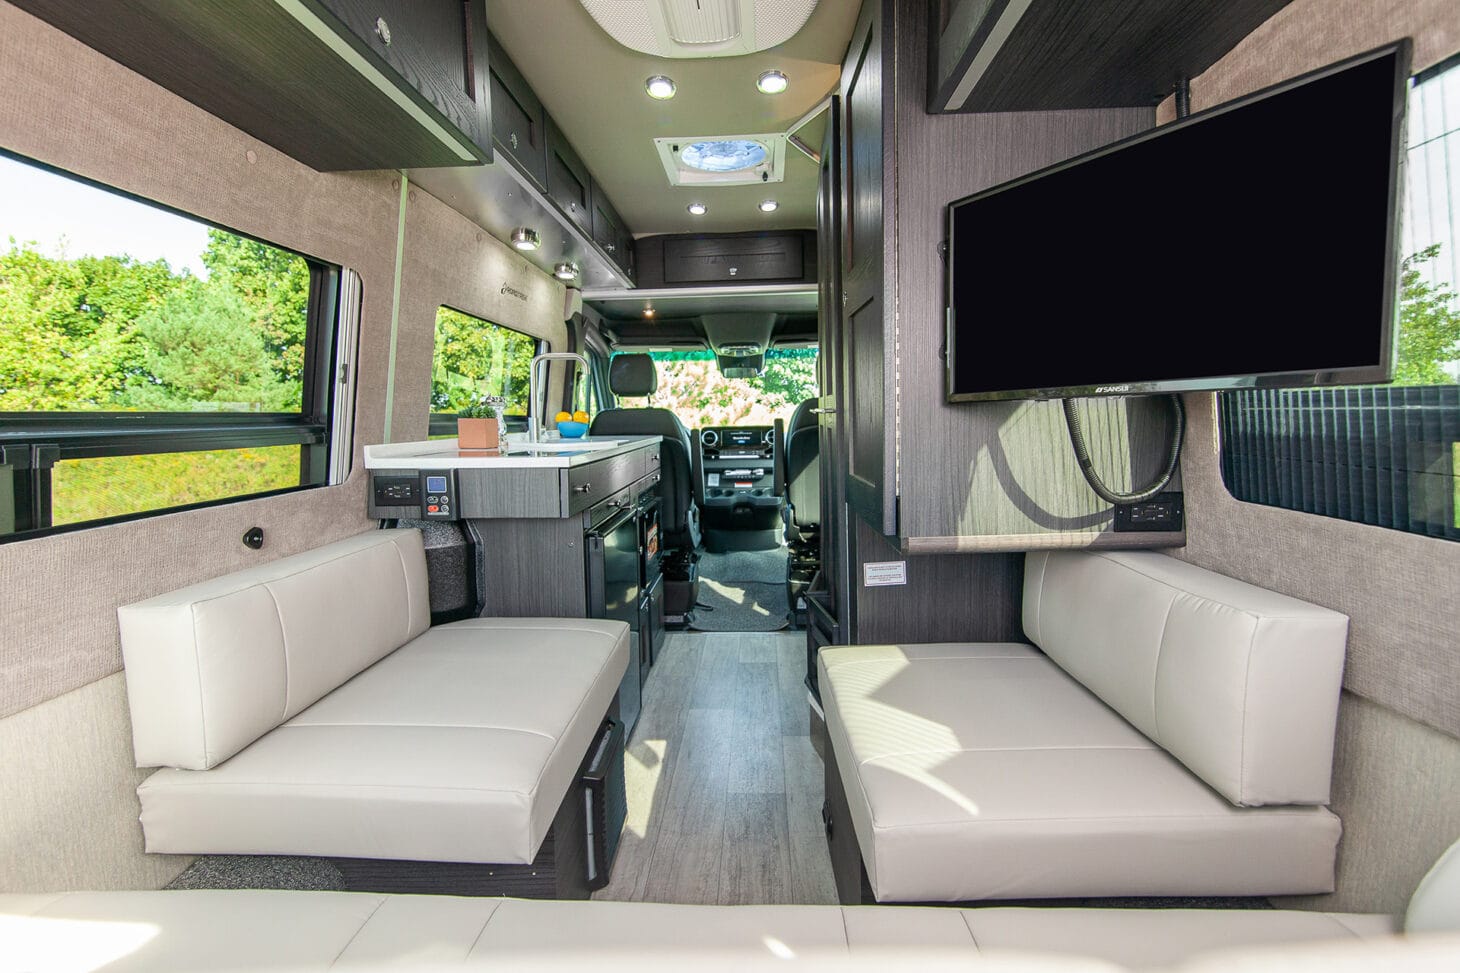 An interior view of a Class B motorhome showcases the RV's light and bright interior decor.